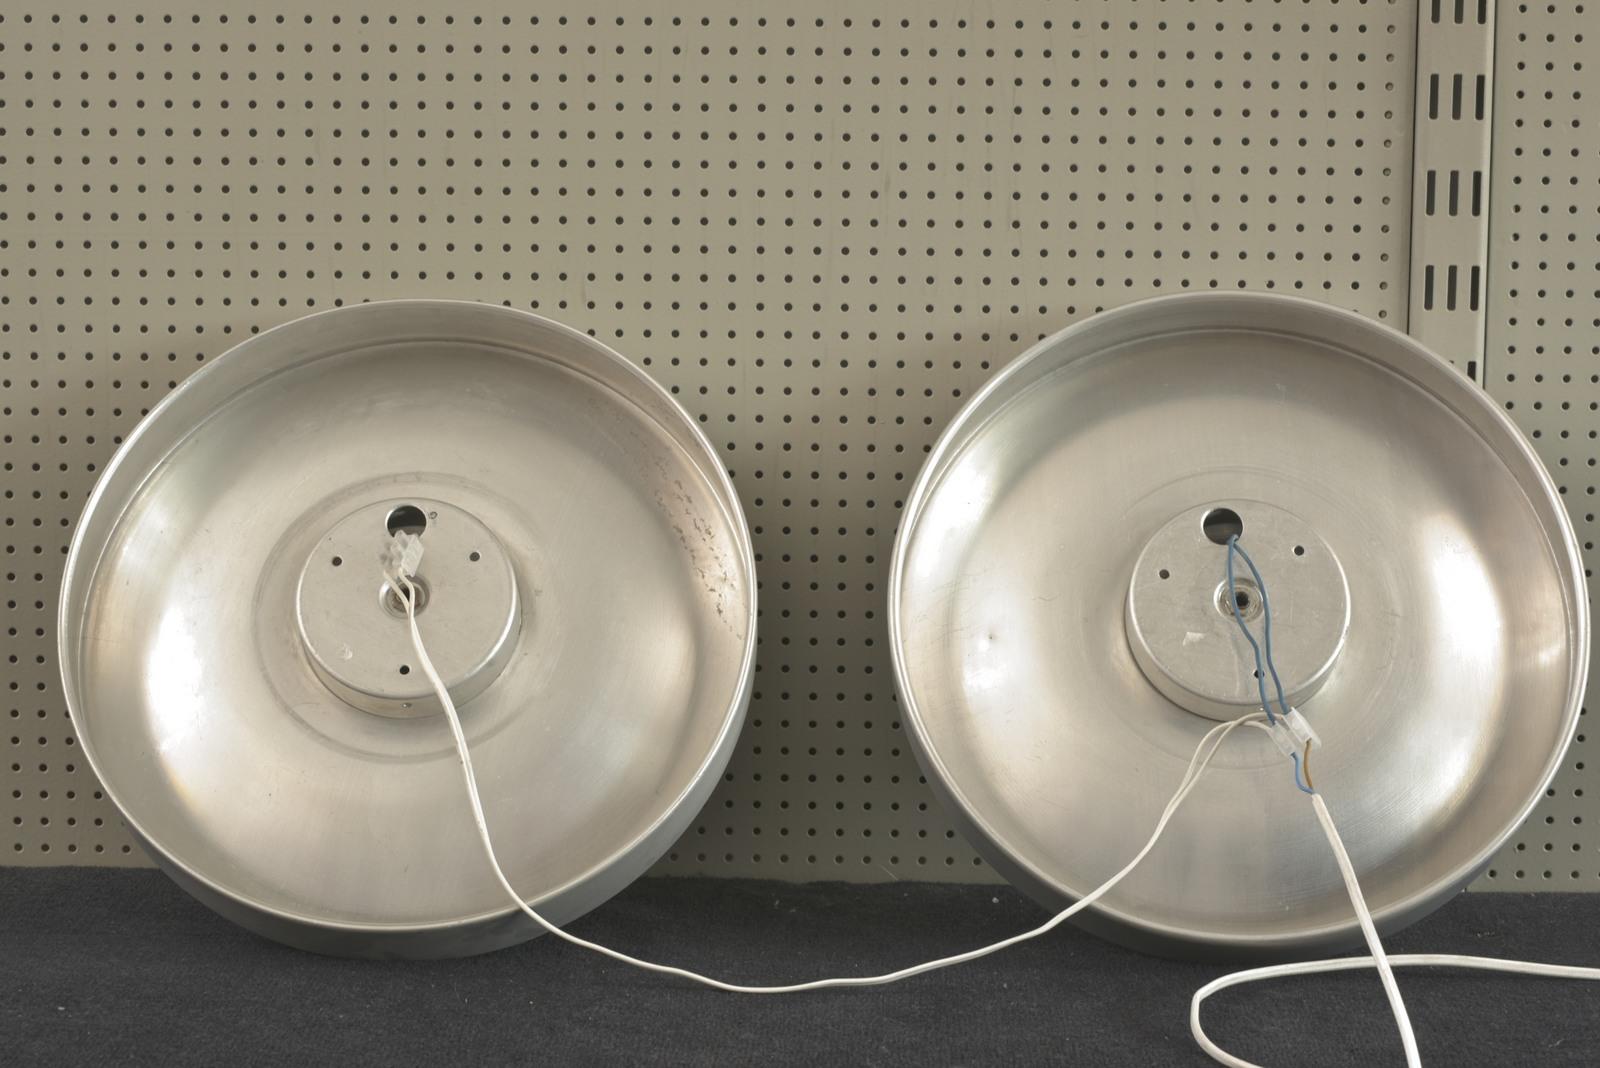 Pair of Wall Lights attr. to Kinkeldey, Germany - 1970s For Sale 2